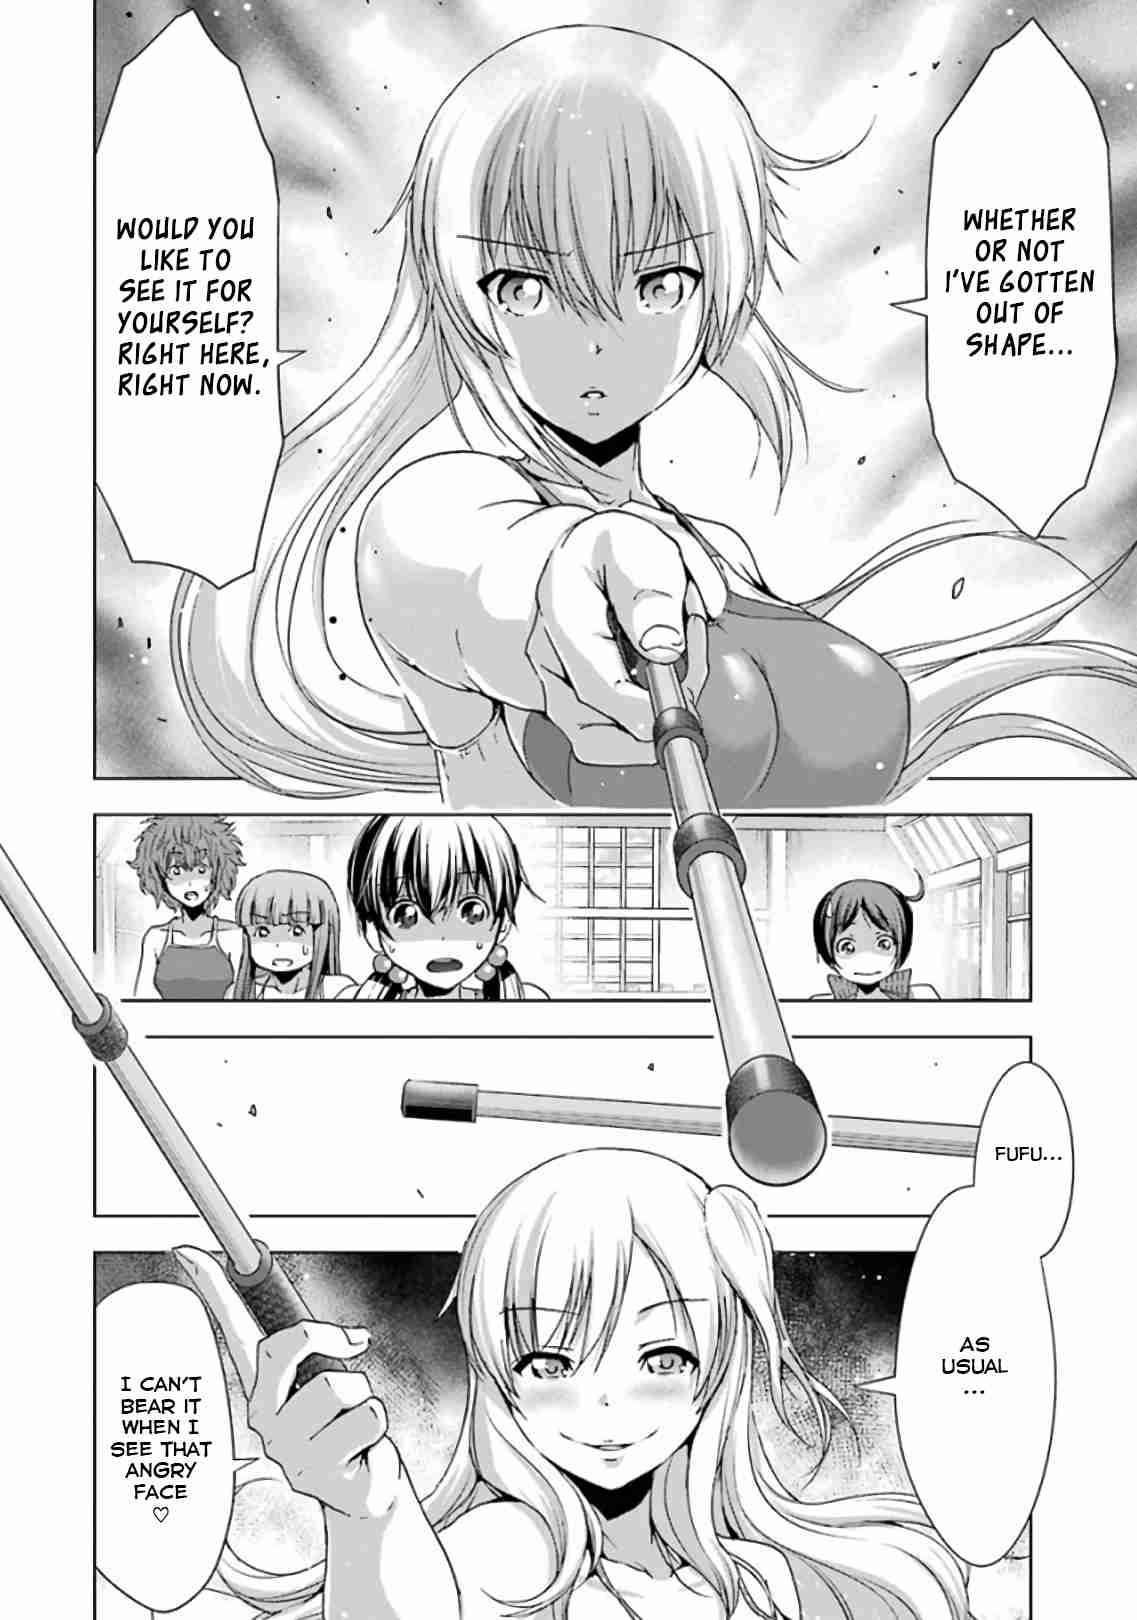 Duel! Vol. 3 Ch. 21 The woman who knows